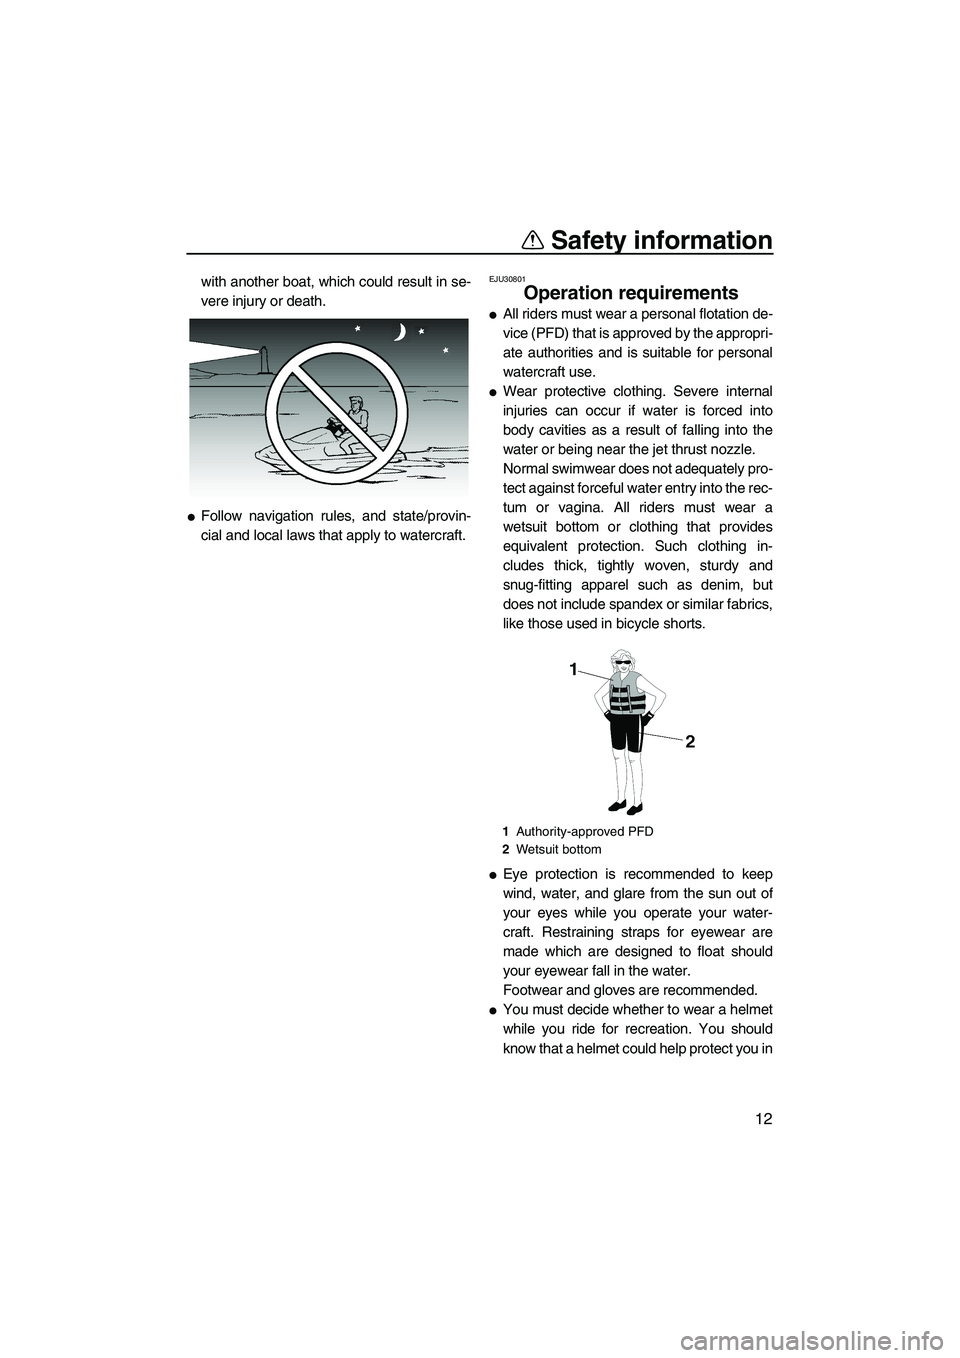 YAMAHA FZR SVHO 2009 User Guide Safety information
12
with another boat, which could result in se-
vere injury or death.
Follow navigation rules, and state/provin-
cial and local laws that apply to watercraft.
EJU30801
Operation re